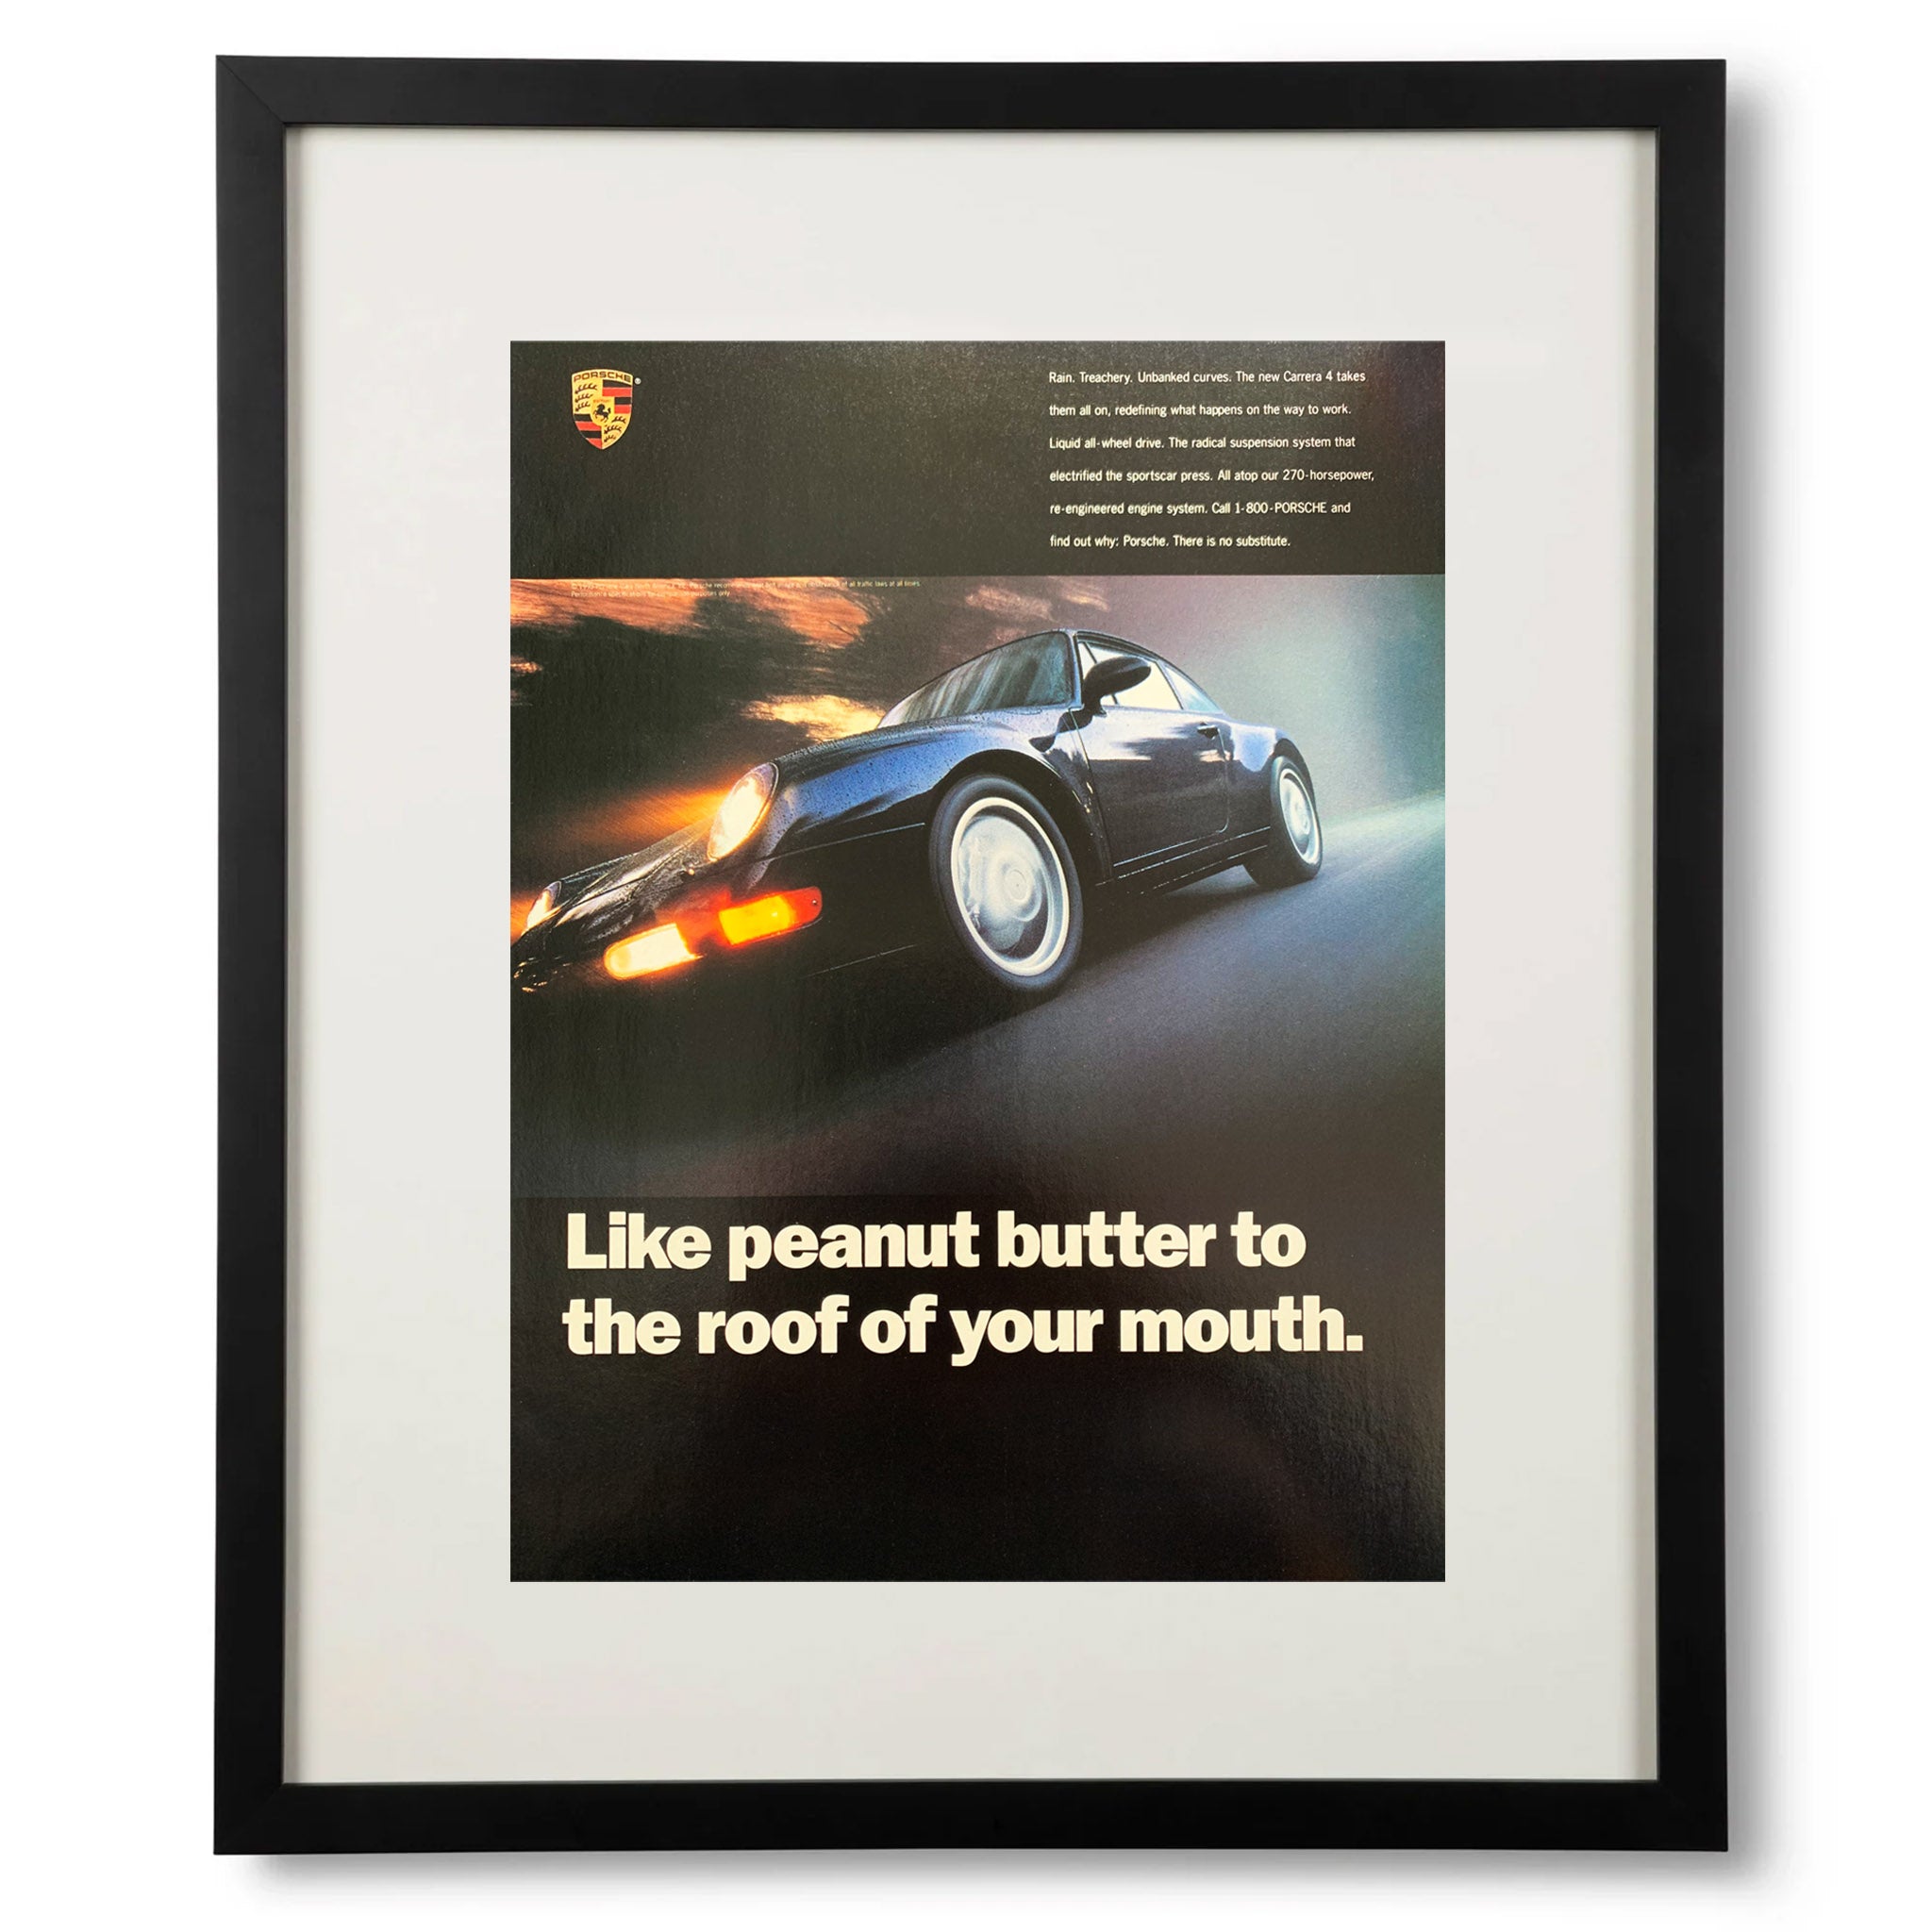 Framed Porsche 911 Carrera Like Peanut Butter on the Roof of Your Mouth Ad